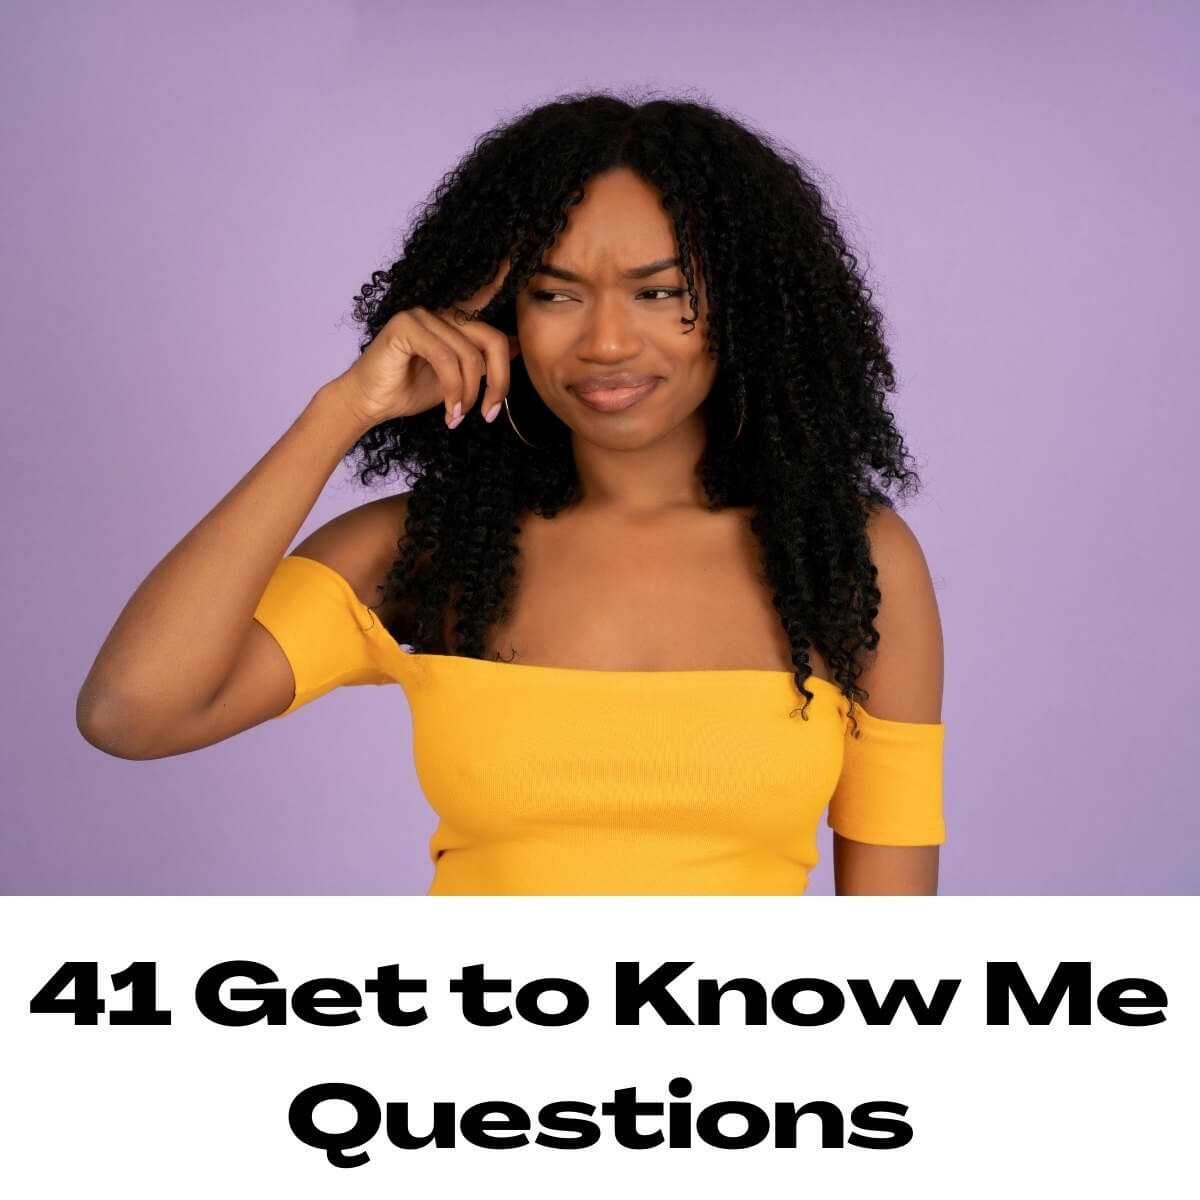 41 Get to Know Me Questions for the Numbers Game on Snapchat